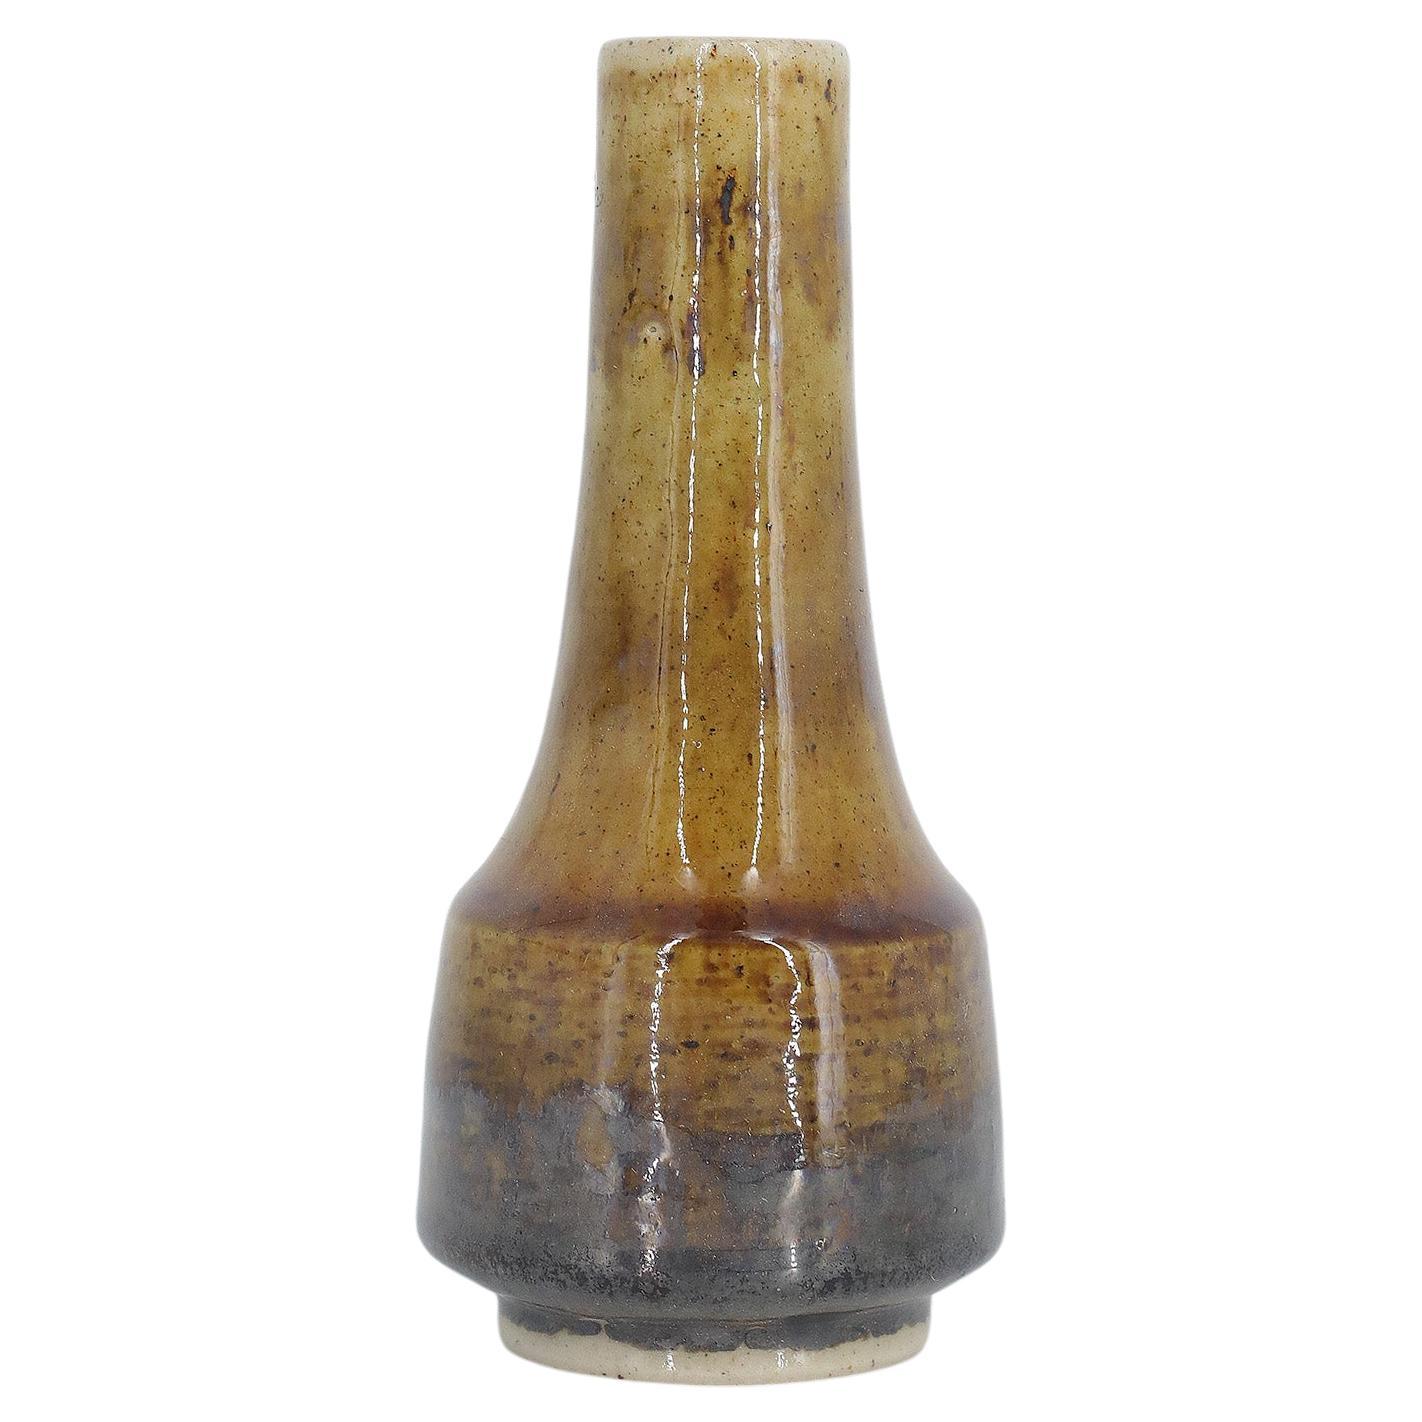 Small Scandinavian Modern Collectible Glazed Brown Stoneware Vase by Gunnar Borg For Sale